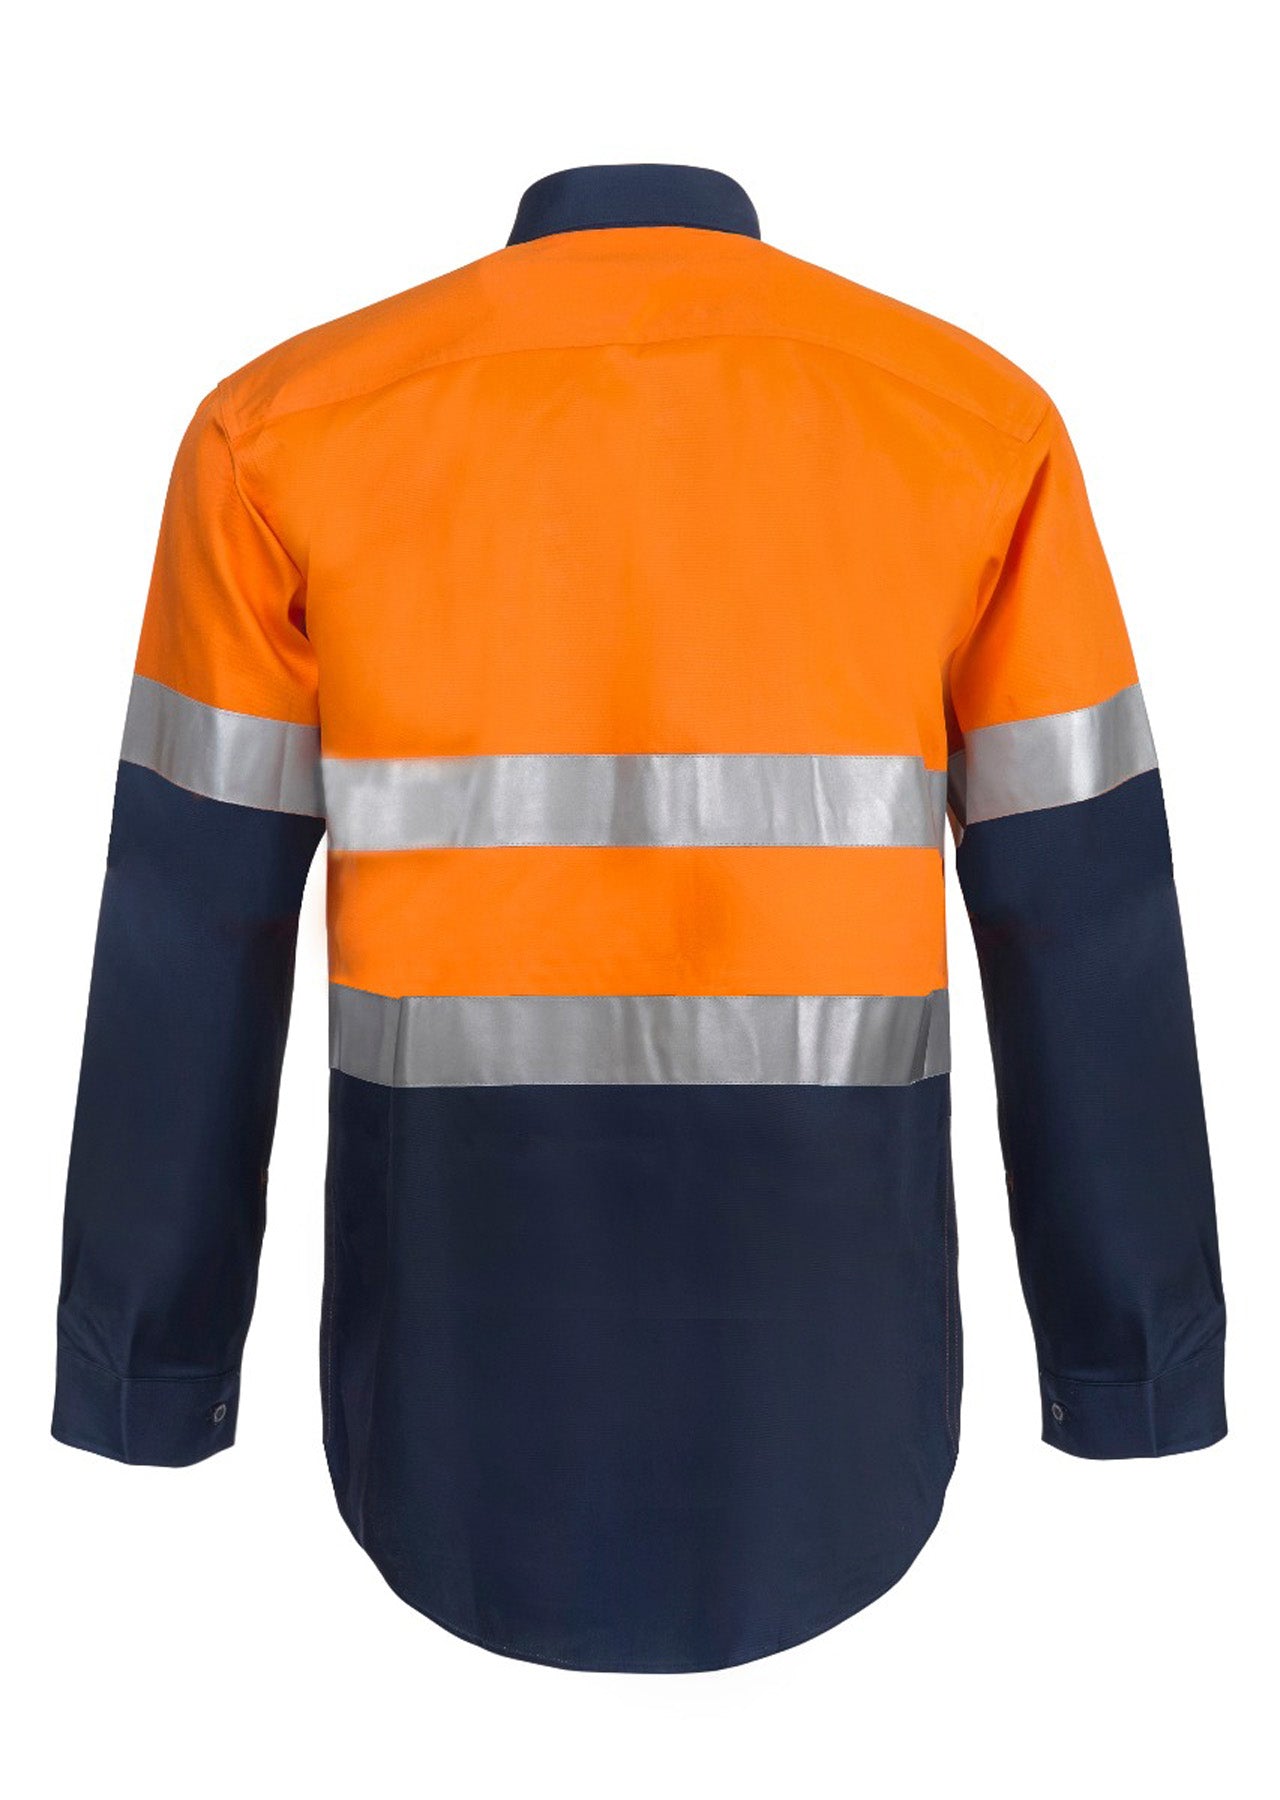 Hi Vis Two Tone Long Sleeve Cotton Drill Shirt with CSR Reflective Tape - made by Workcraft